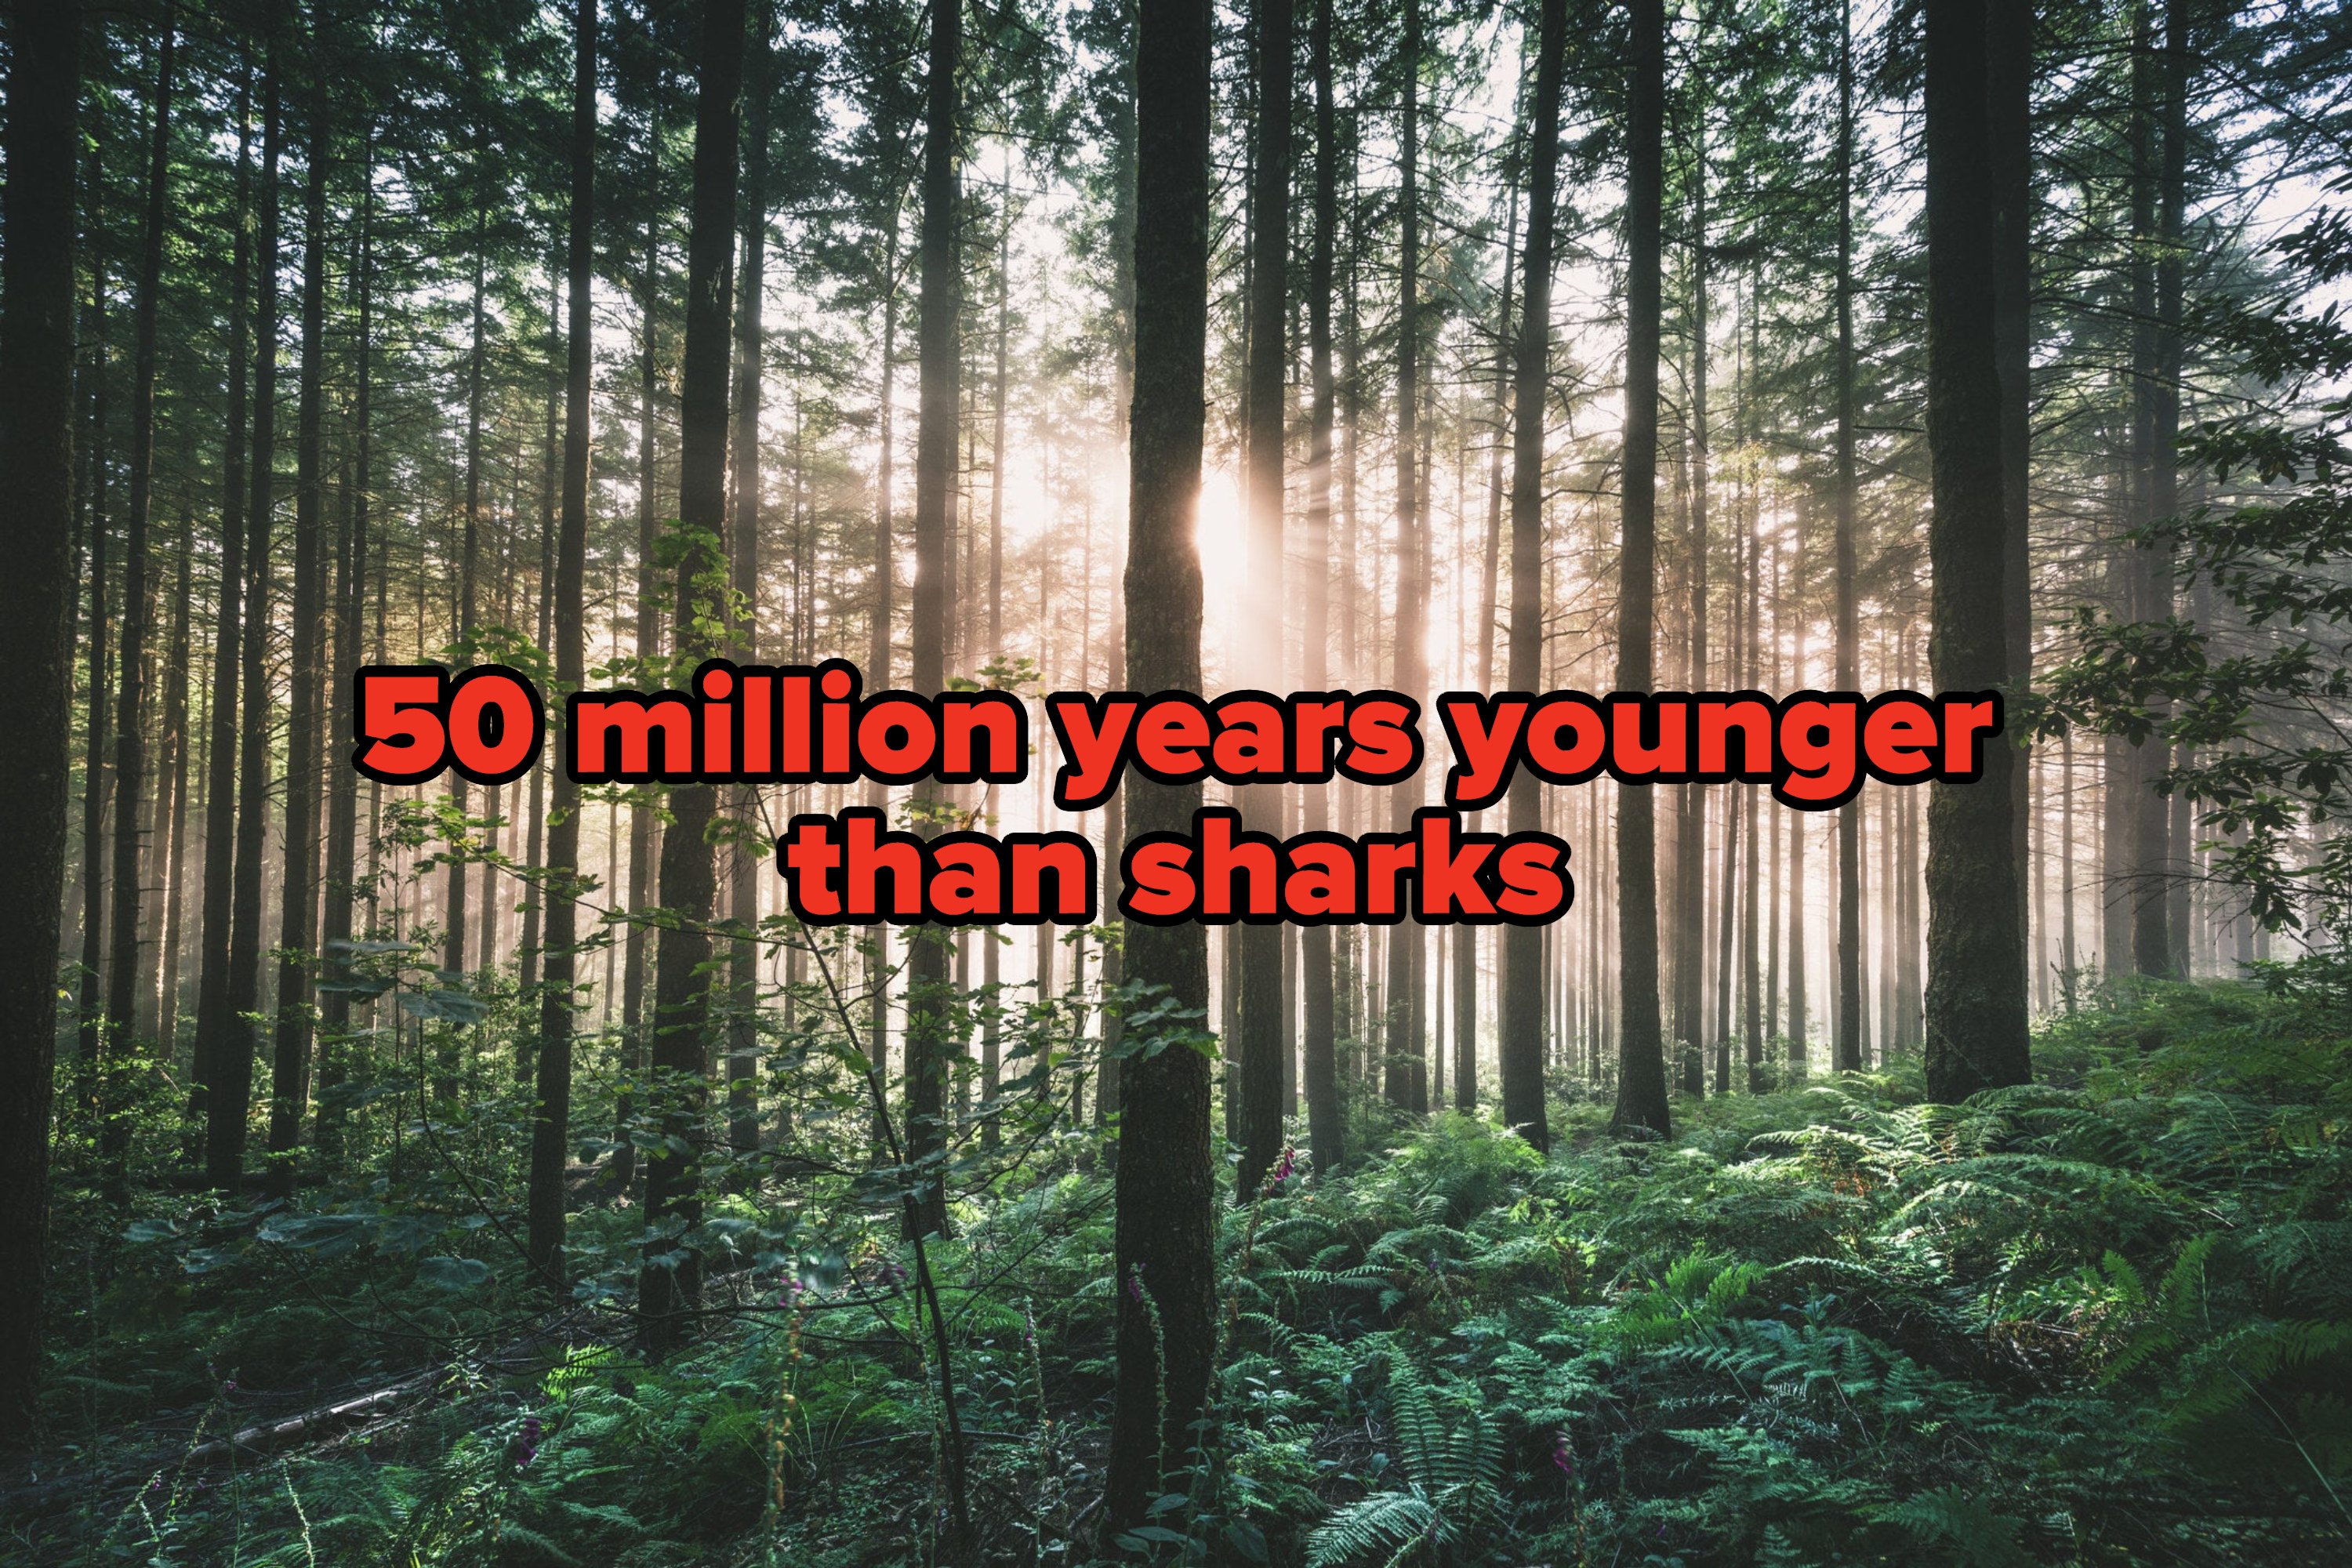 50 million years younger than sharks written over a forest